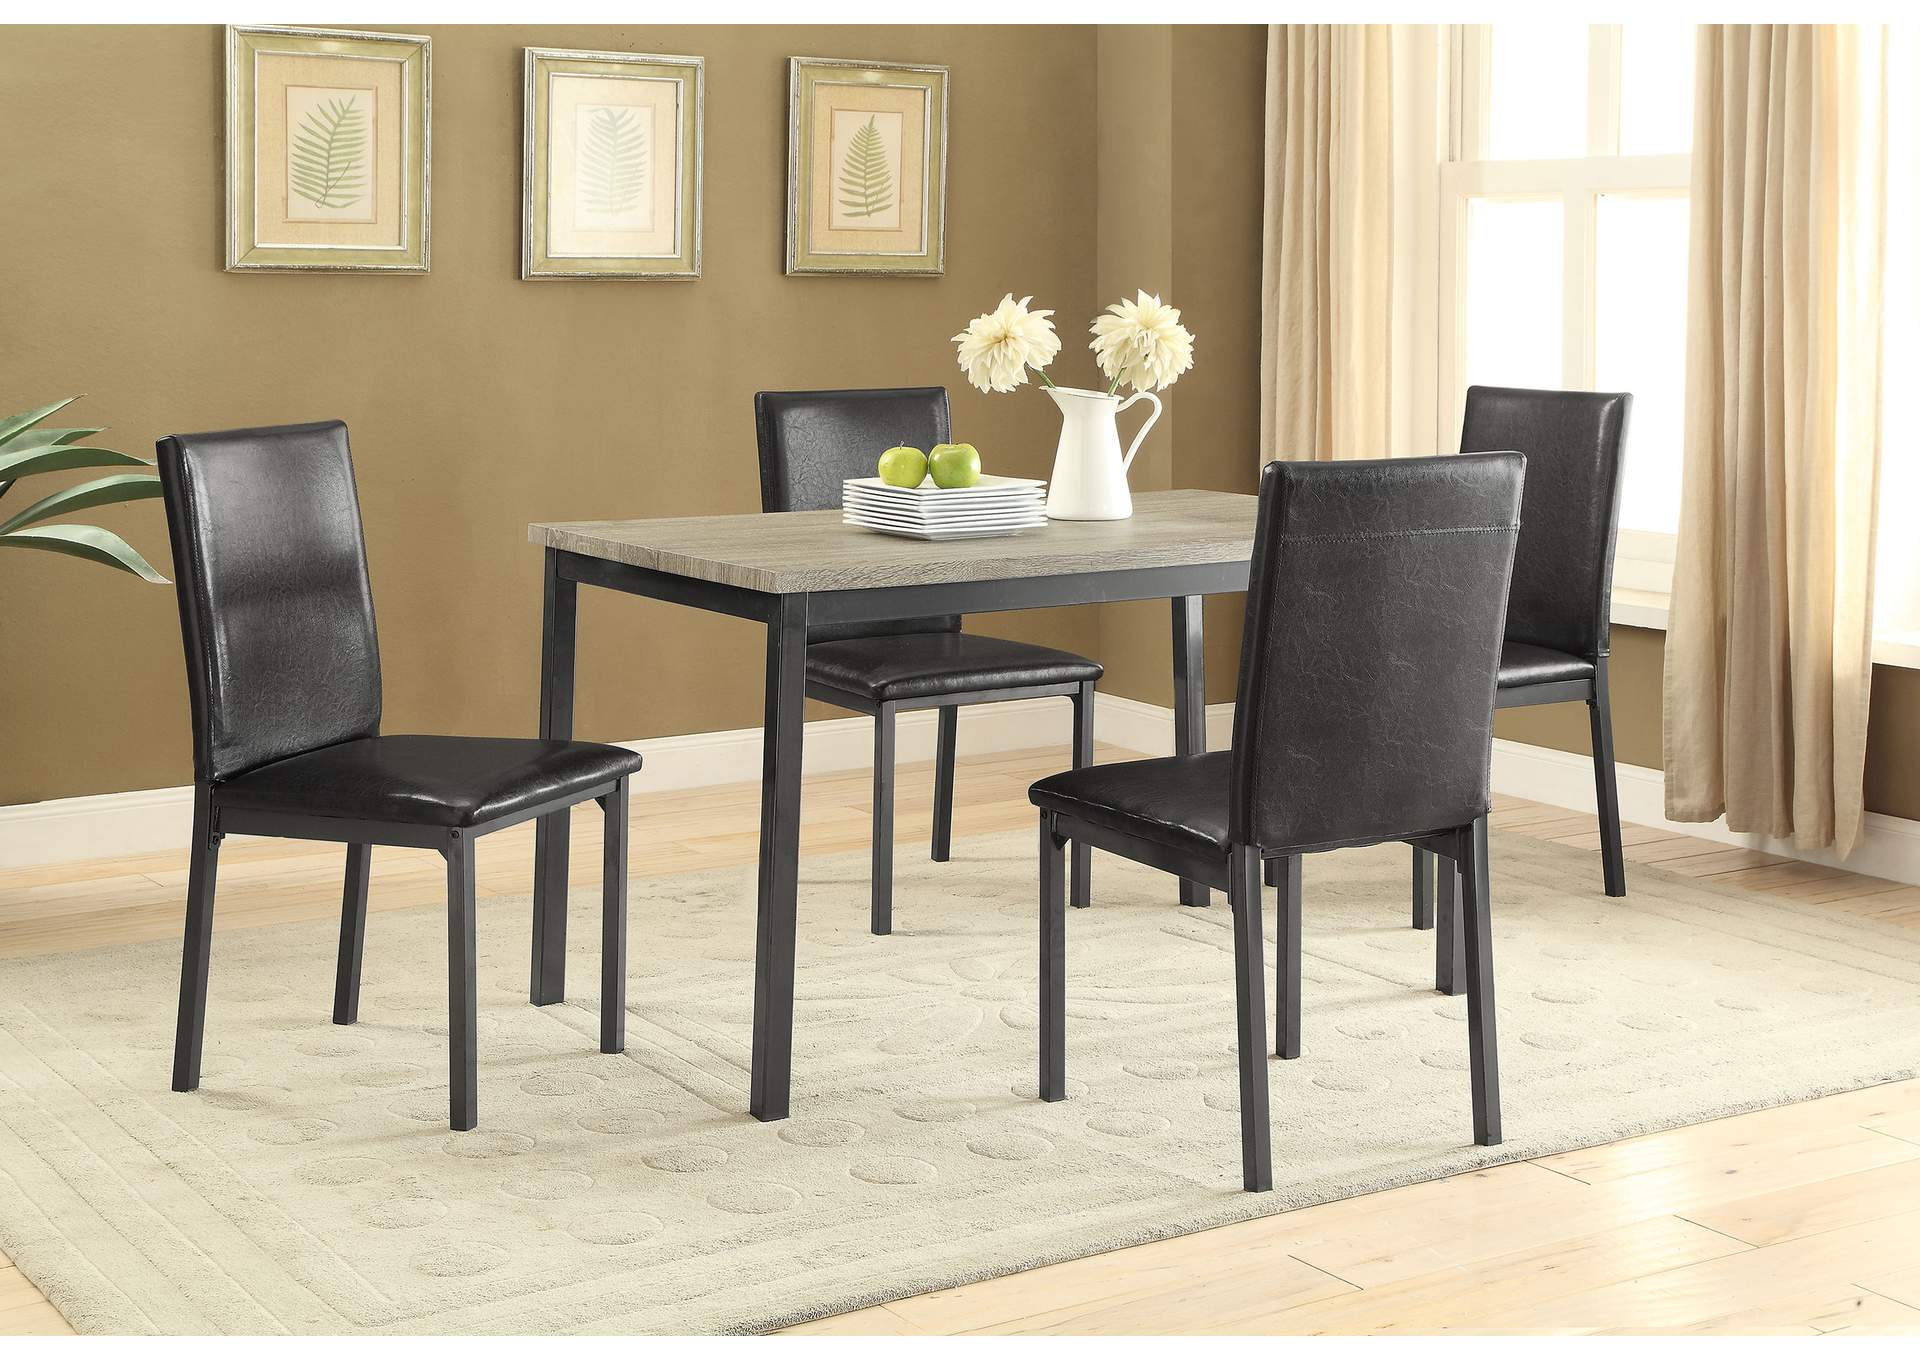 Garza Upholstered Dining Chairs Black (Set of 2),Coaster Furniture